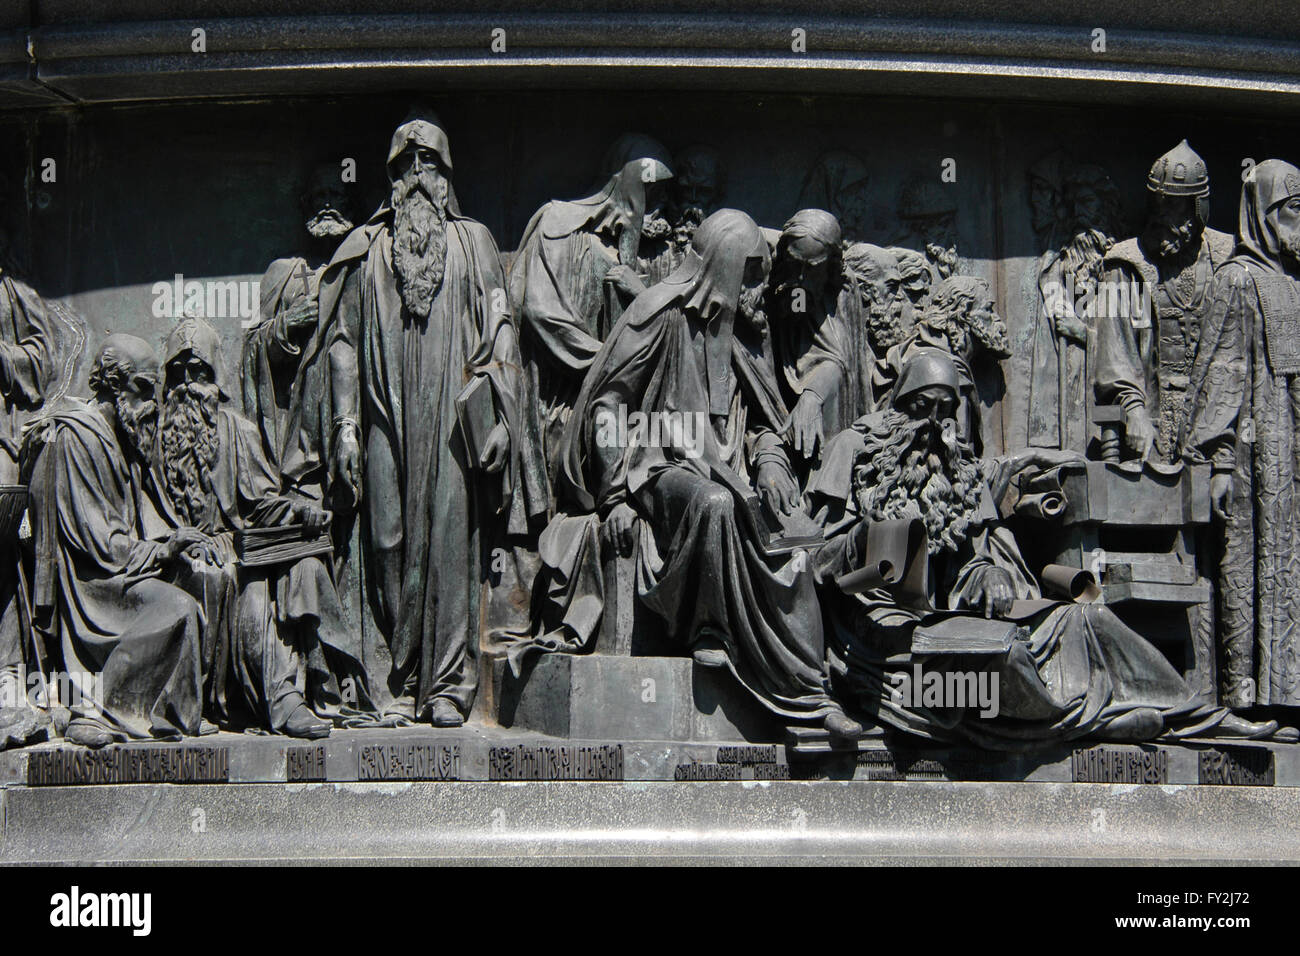 Russian Saints and spiritual leaders depicted in the bas relief by sculptor Matvey Chizhov. Detail of the Monument to the Millennium of Russia (1862) designed by Mikhail Mikeshin in Veliky Novgorod, Russia. Persons from left to right: Anthony and Theodosius of Kiev, Kuksha of the Kiev Caves, Nestor the Chronicler, Cyril of Beloozero and Stephen of Perm, Metropolitan Alexius of Moscow and Sergius of Radonezh (both sitting), Metropolitan Peter Mogila of Kiev and Metropolitan Jonah of Moscow (both standing in the background), Maximus the Greek (sitting), Saints Zosima and Sabbatius of Solovki, Me Stock Photo